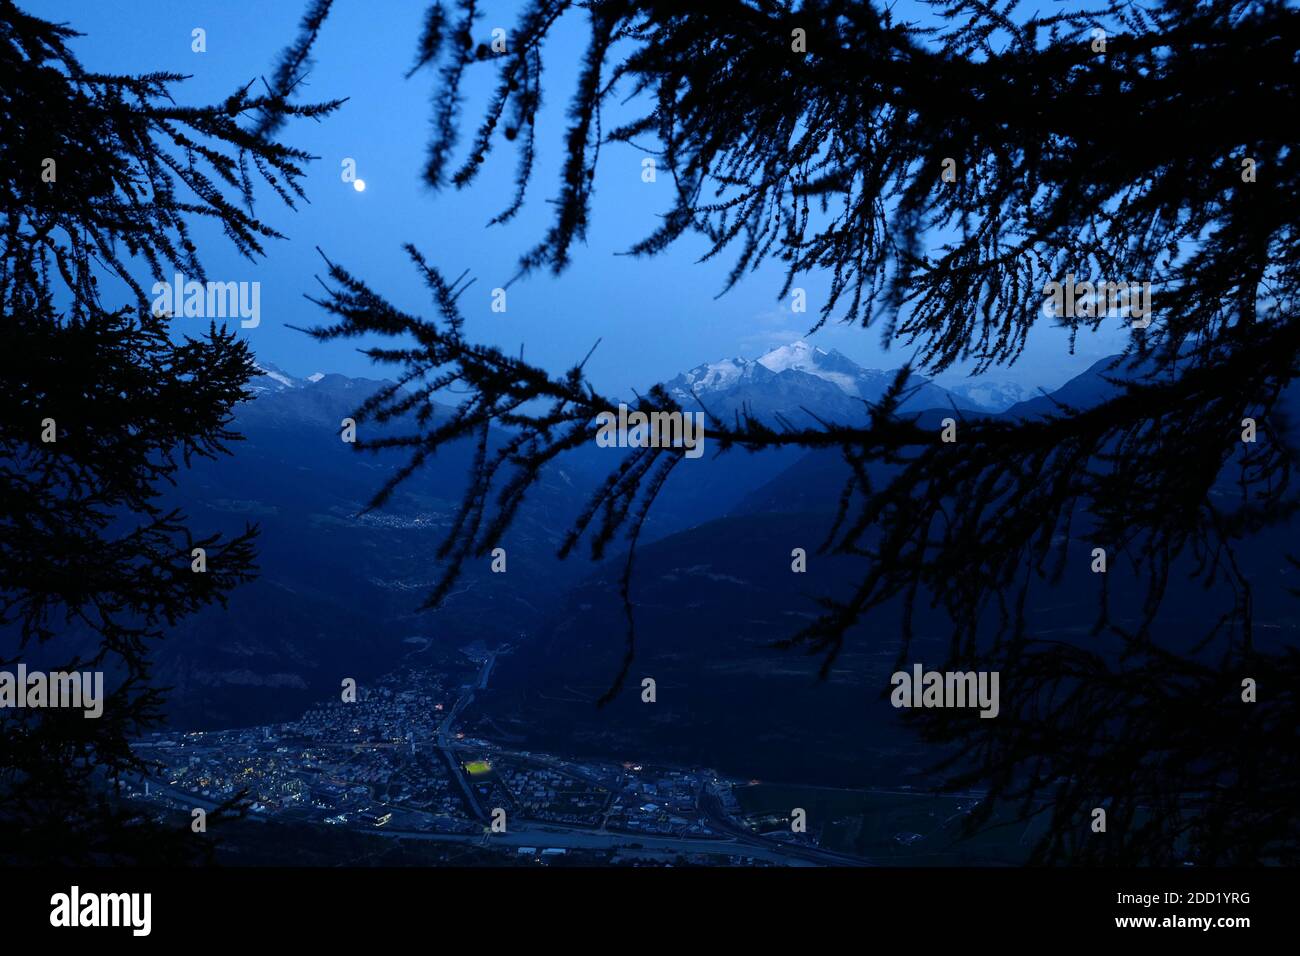 Contrasting view of Visp and the Dürrenhorn mountain at dusk. Stock Photo